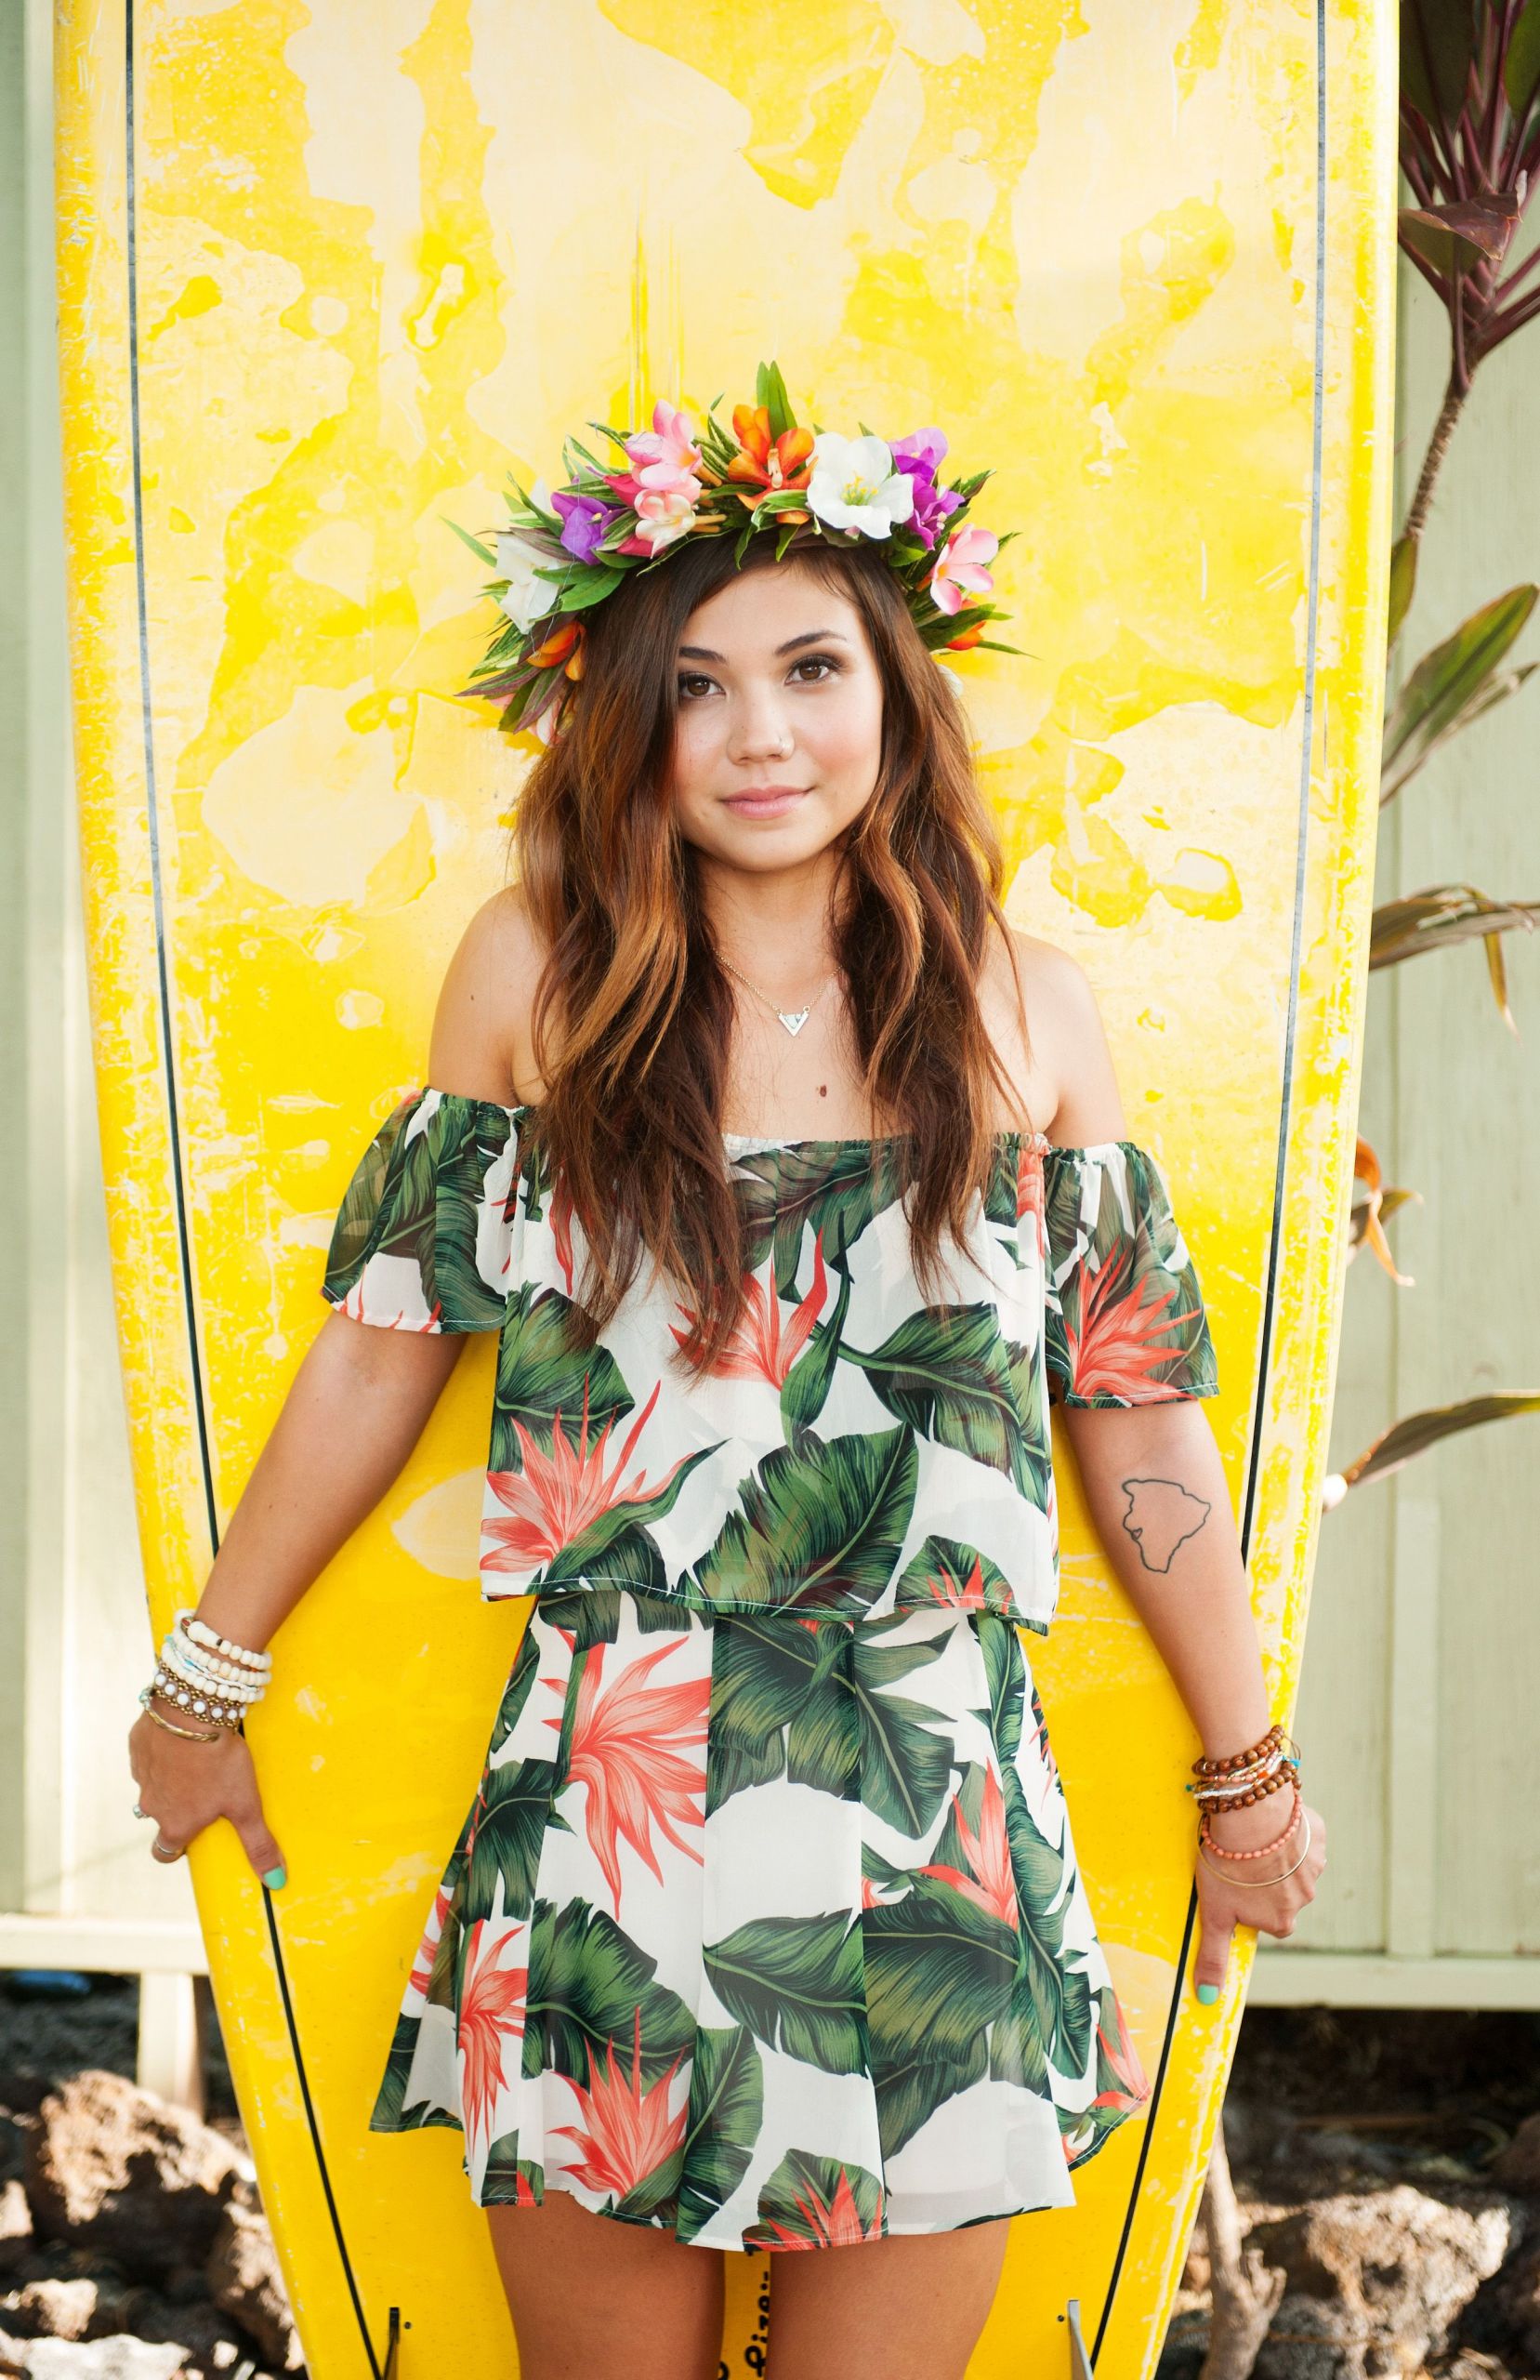 Beach Party Costume Ideas
 Nothing beats summer at the beach in Show Me Your Mumu